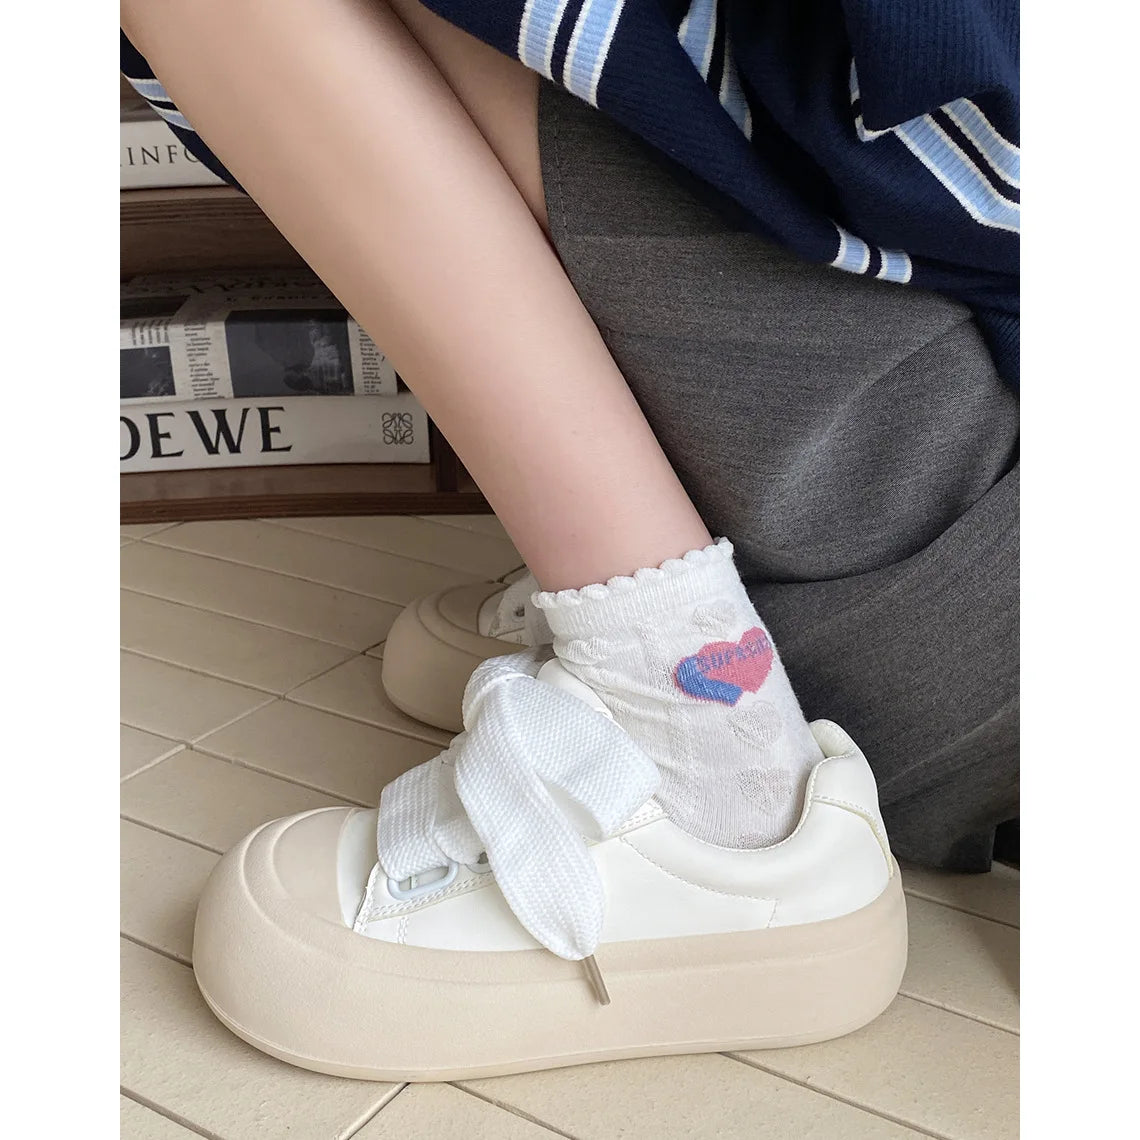 LIZAKOSHT Popular Shoes for Women Spring and Autumn New Super Hot Little White Shoes Hong Kong Style Students' Thick Sole Shoes